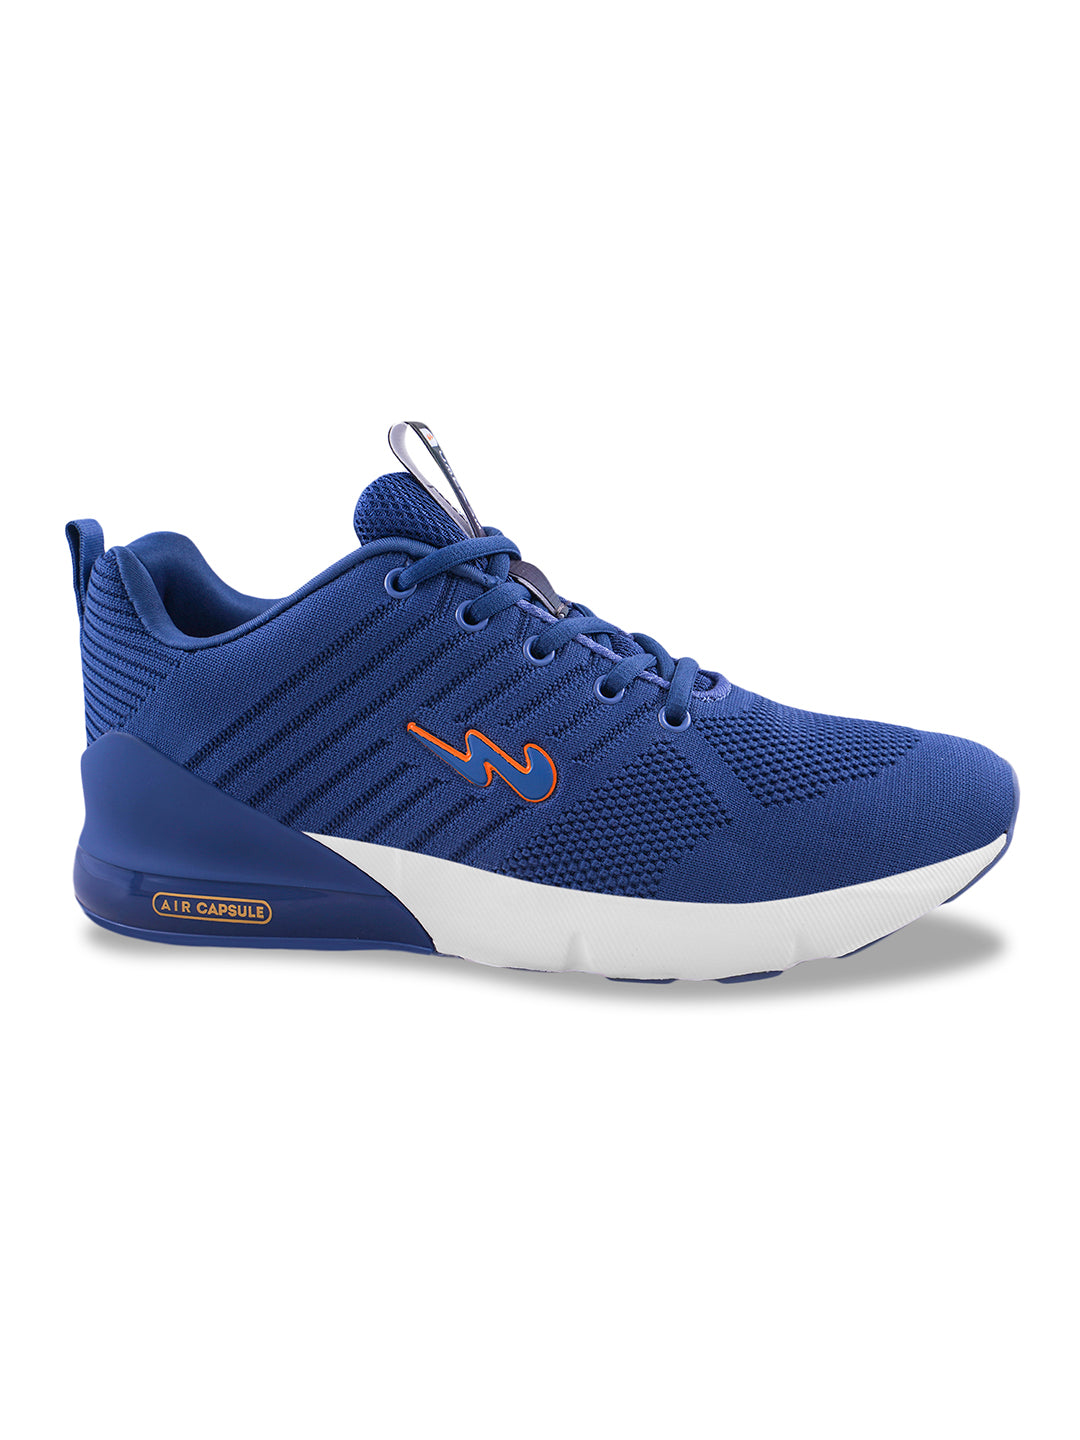 MIKE (N) Blue Men's Running Shoes